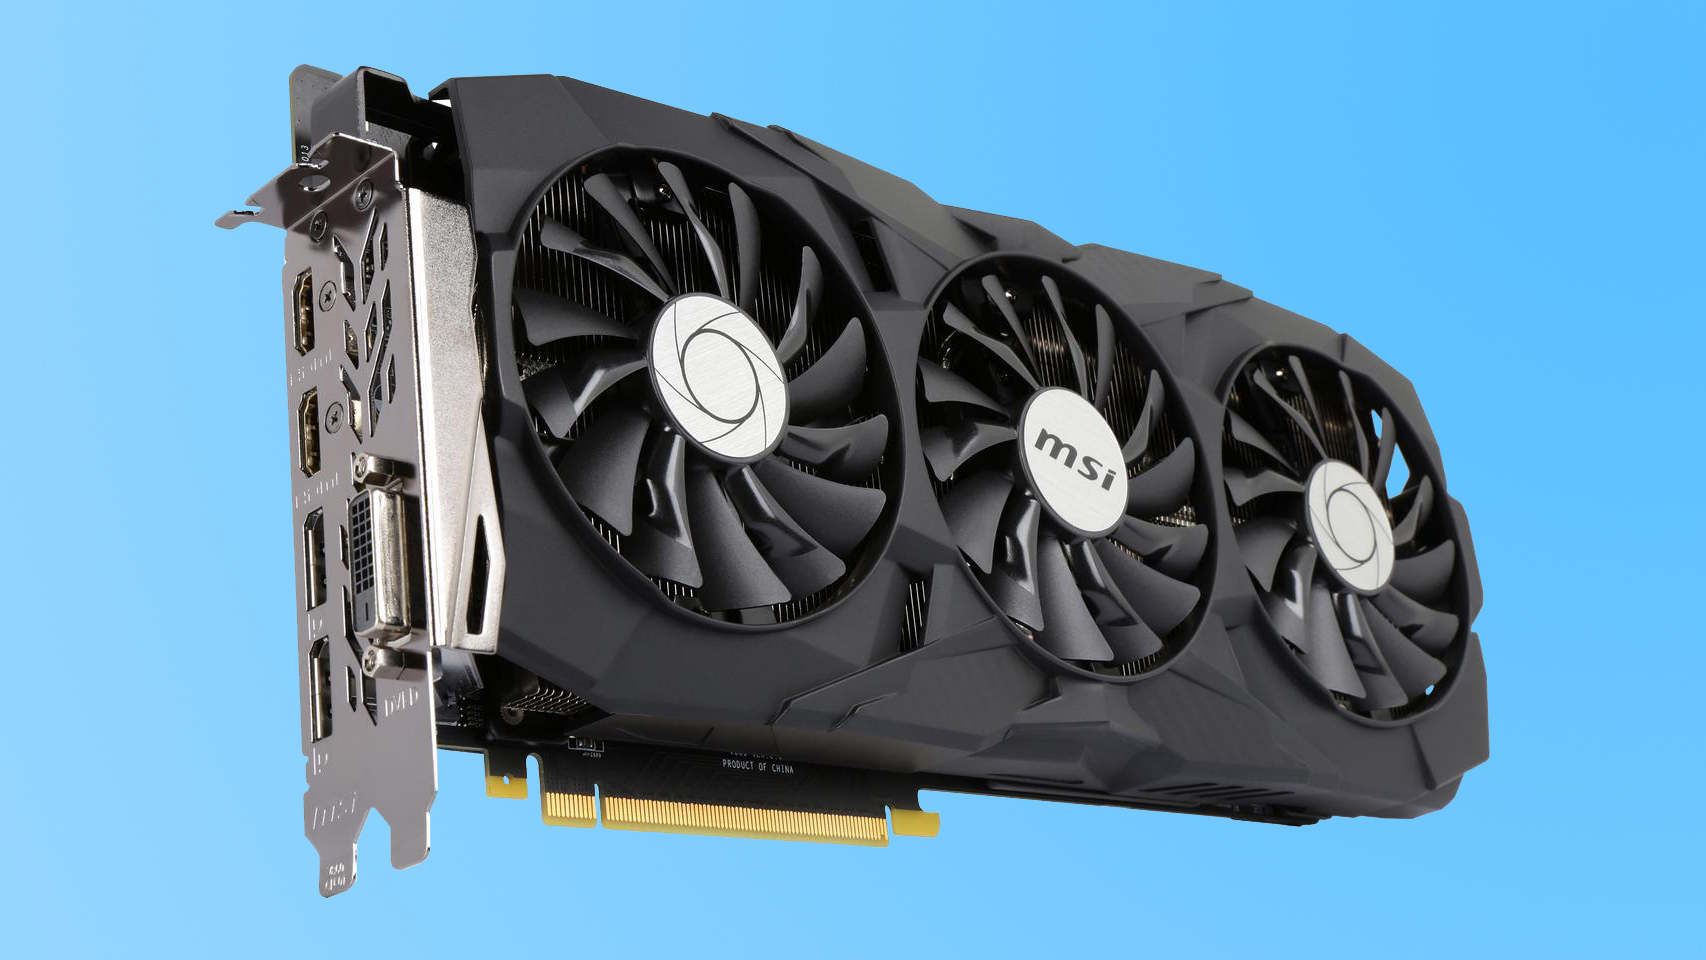 The best cheap graphics card prices and deals for January 2021